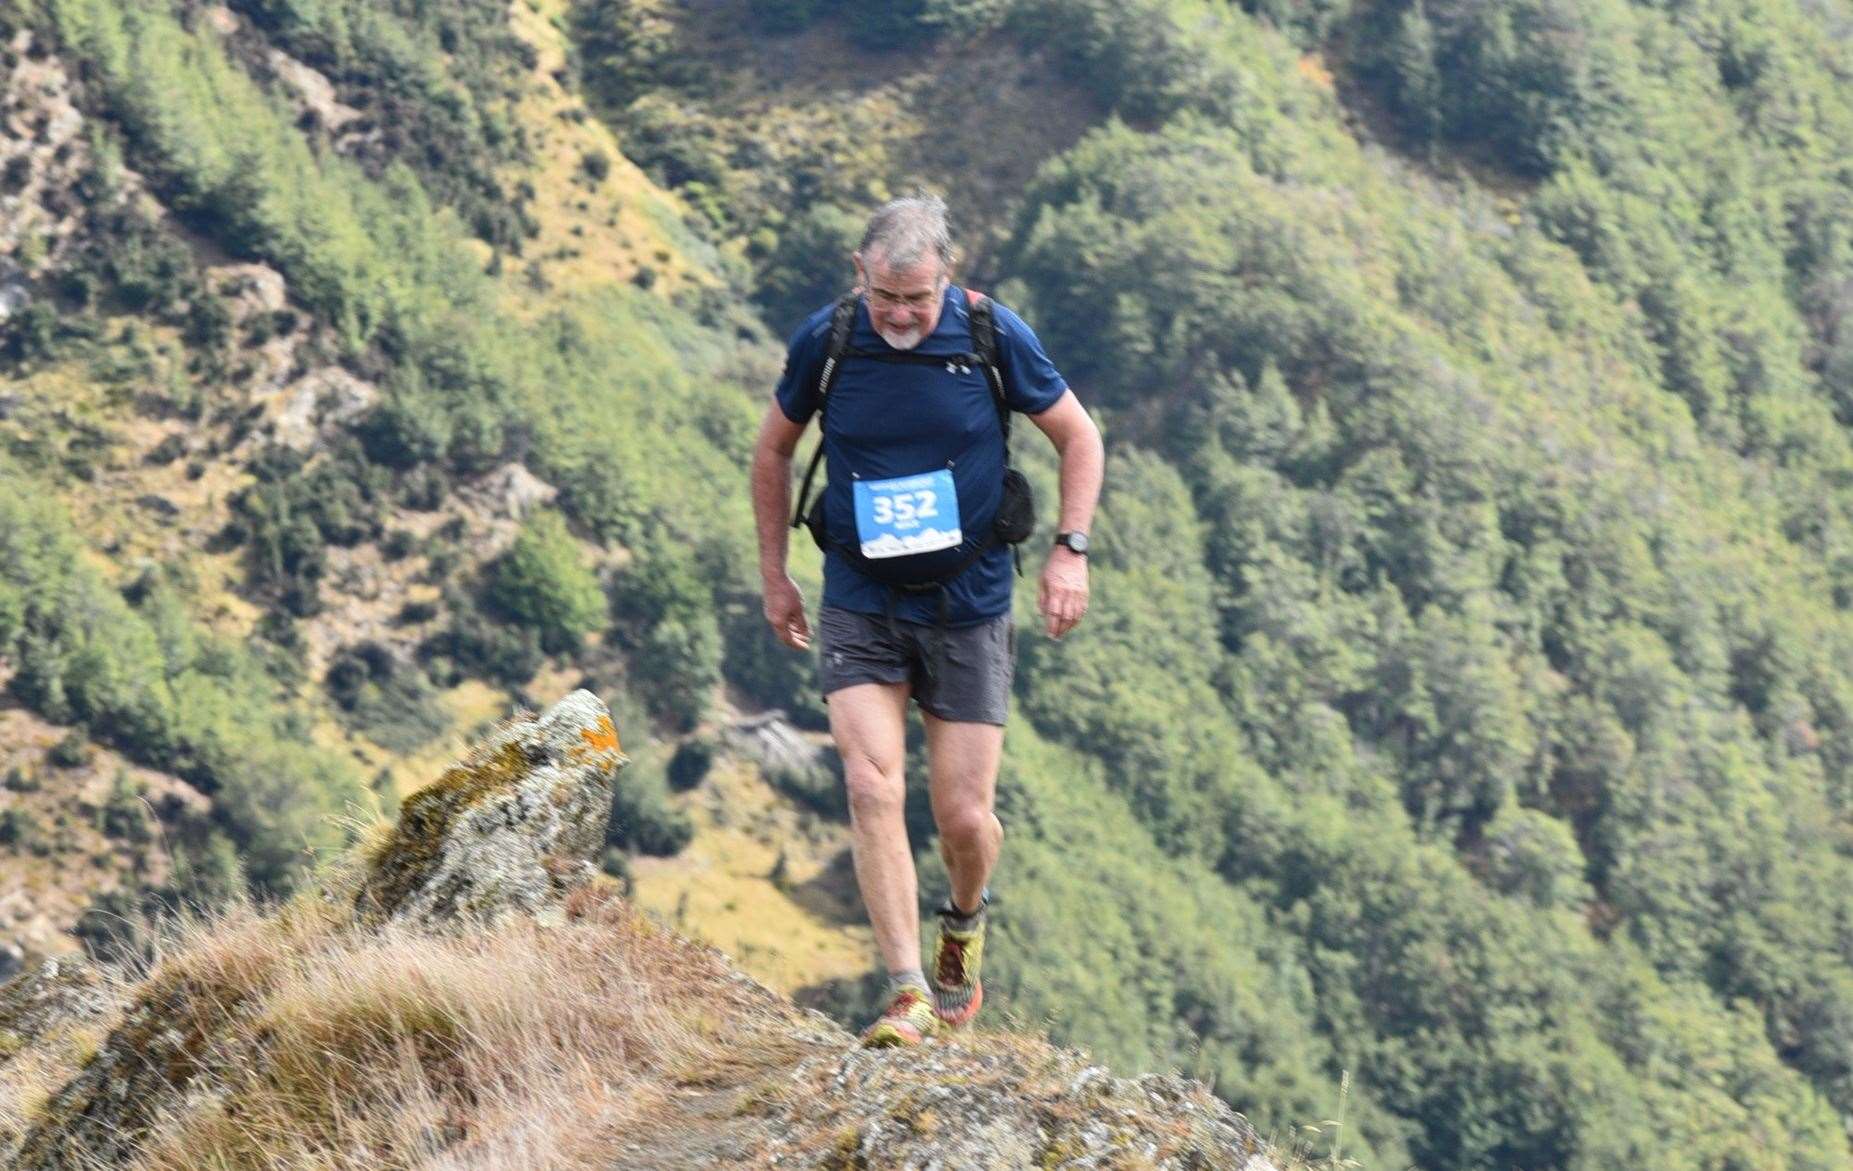 Mike Gratton in a trail race in New Zealand